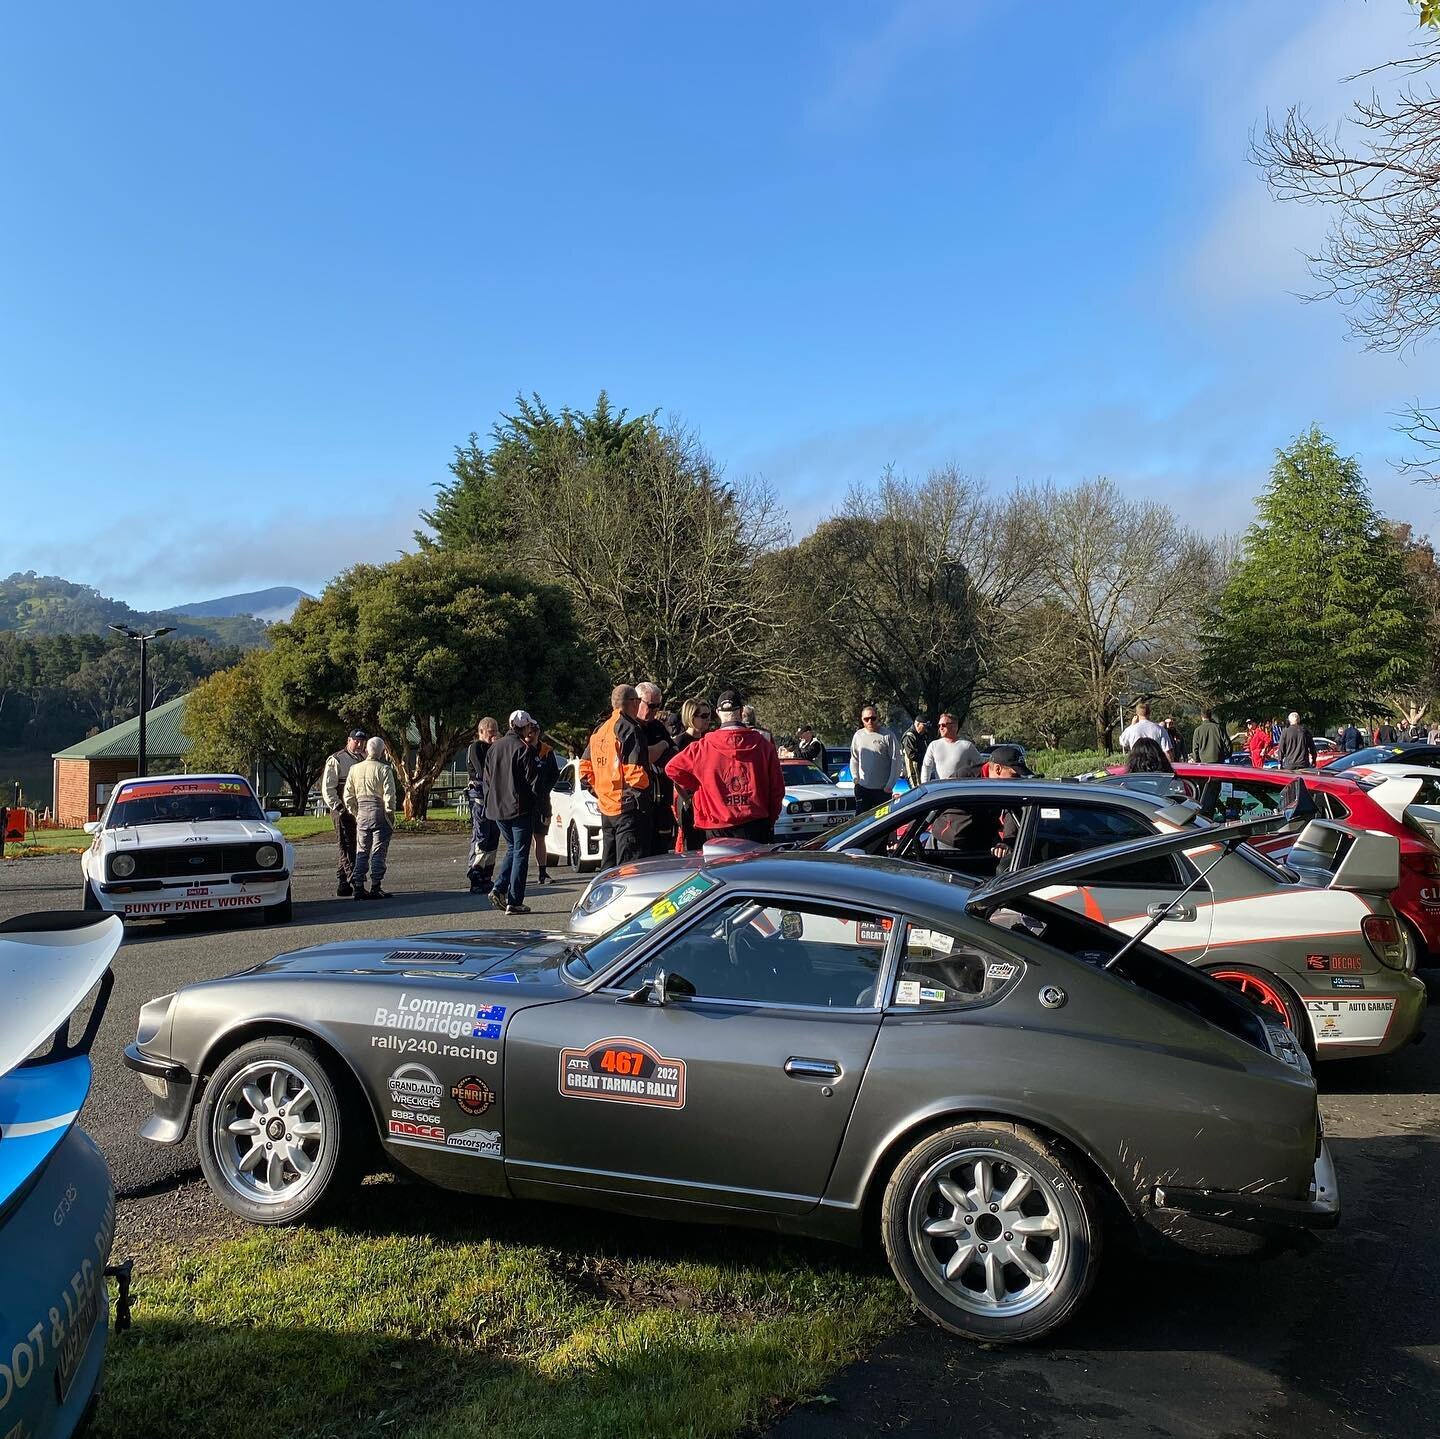 Blue skies for day 2 which ended with 1st in class &amp; 10th outright. Thanks to the organisers &amp; all the officials for a great event! Looking forward to next year. #TheGreatTarmacRally2022
 #AustralianTarmacRally#datsun #datsun240z #240z #datto